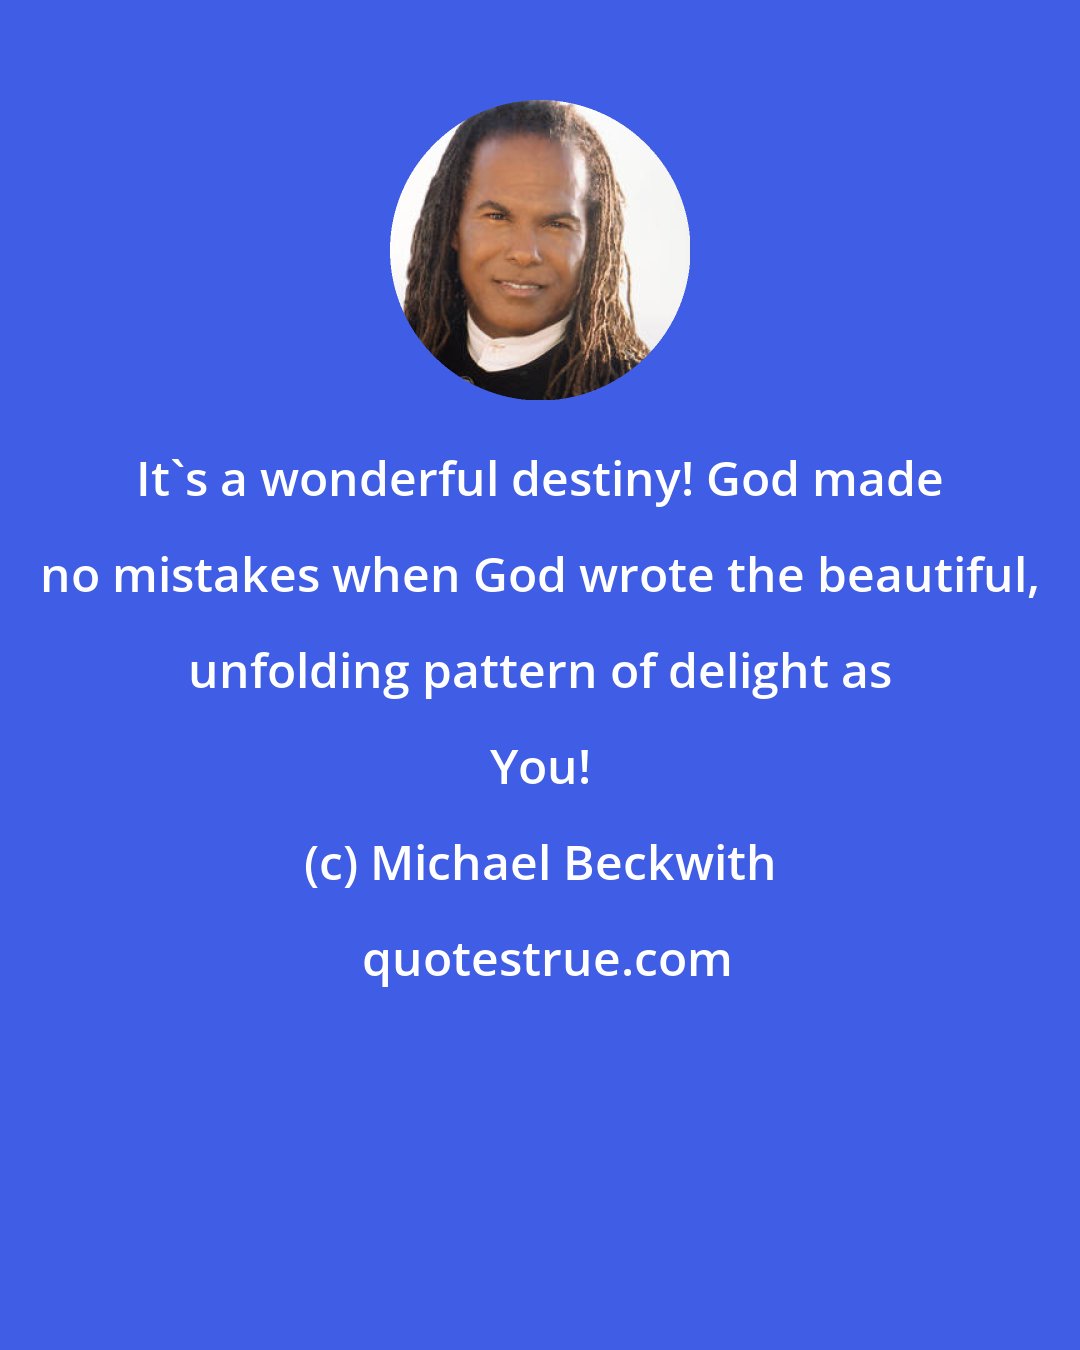 Michael Beckwith: It's a wonderful destiny! God made no mistakes when God wrote the beautiful, unfolding pattern of delight as You!